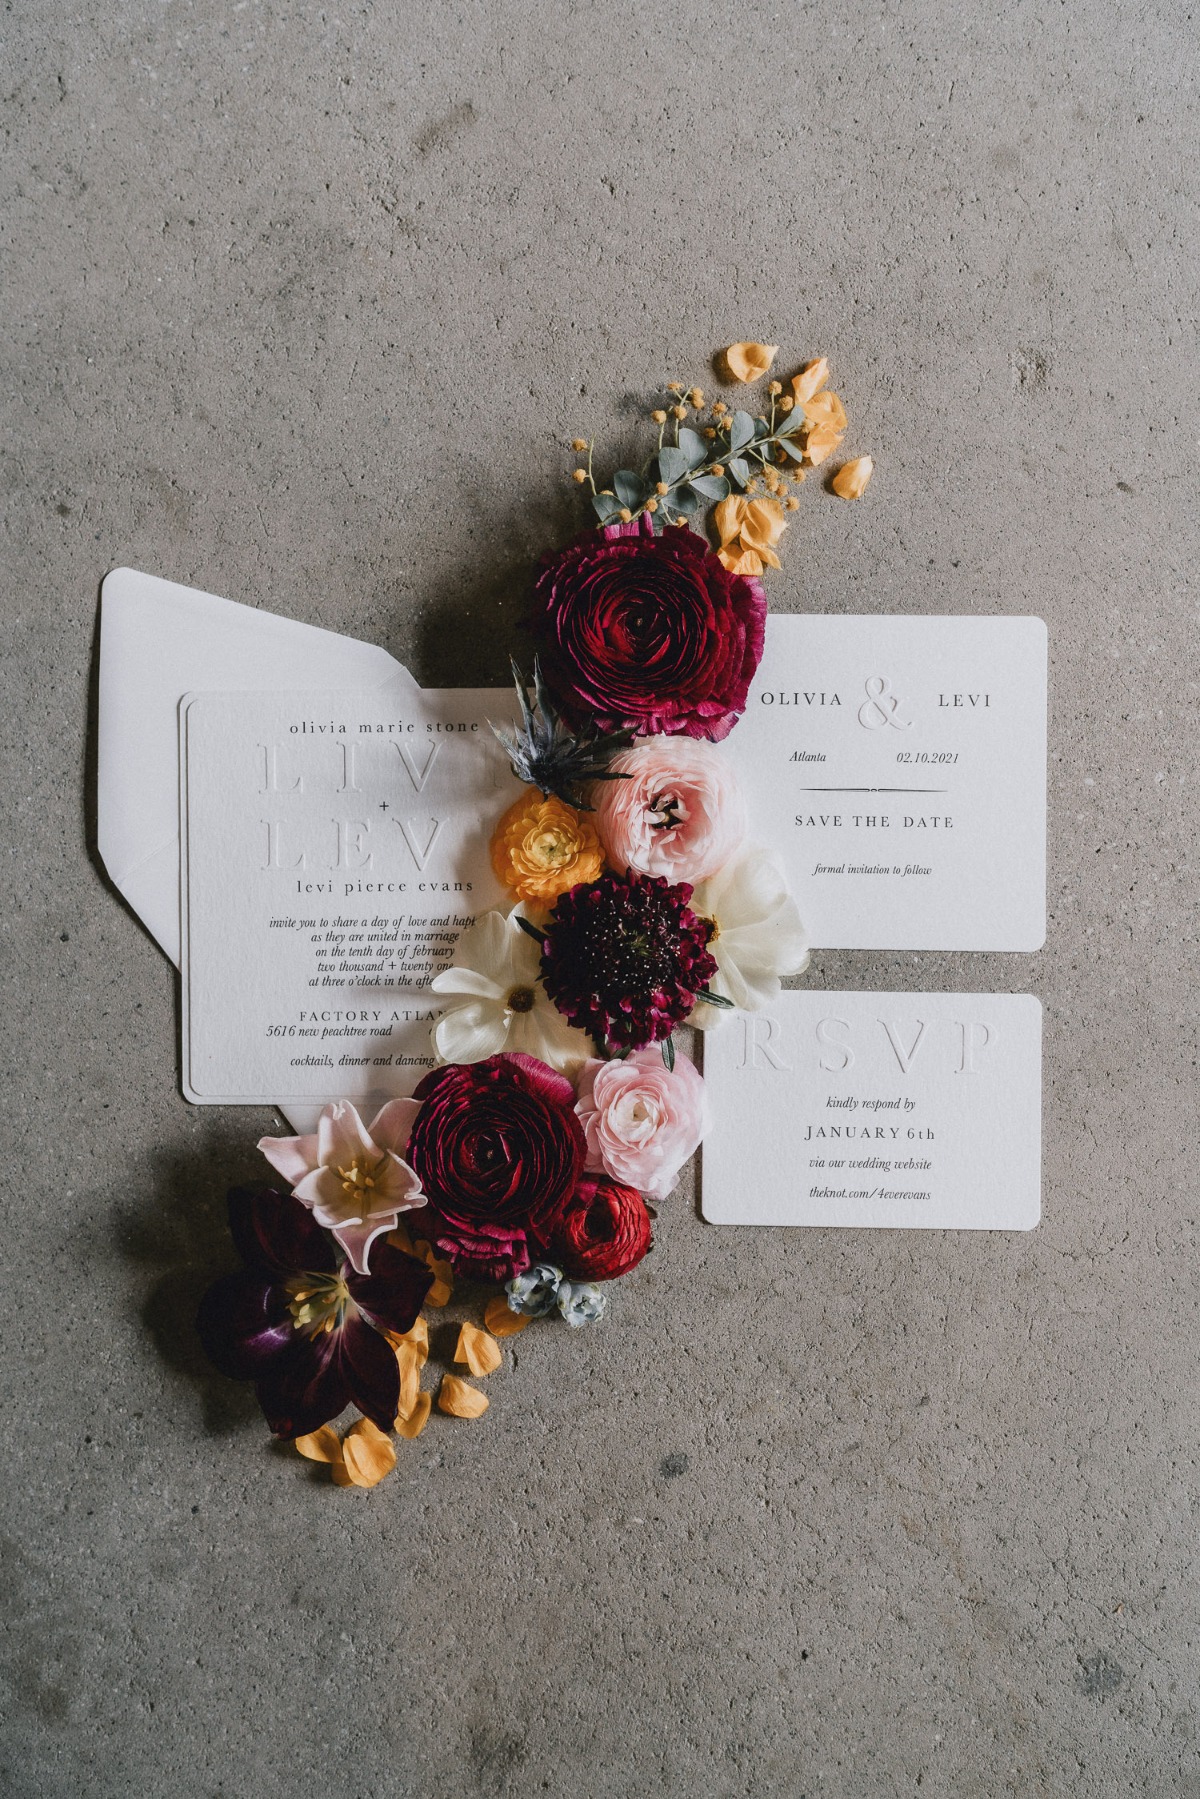 A Budget-Friendly Micro Wedding That Will Blow Your Mind